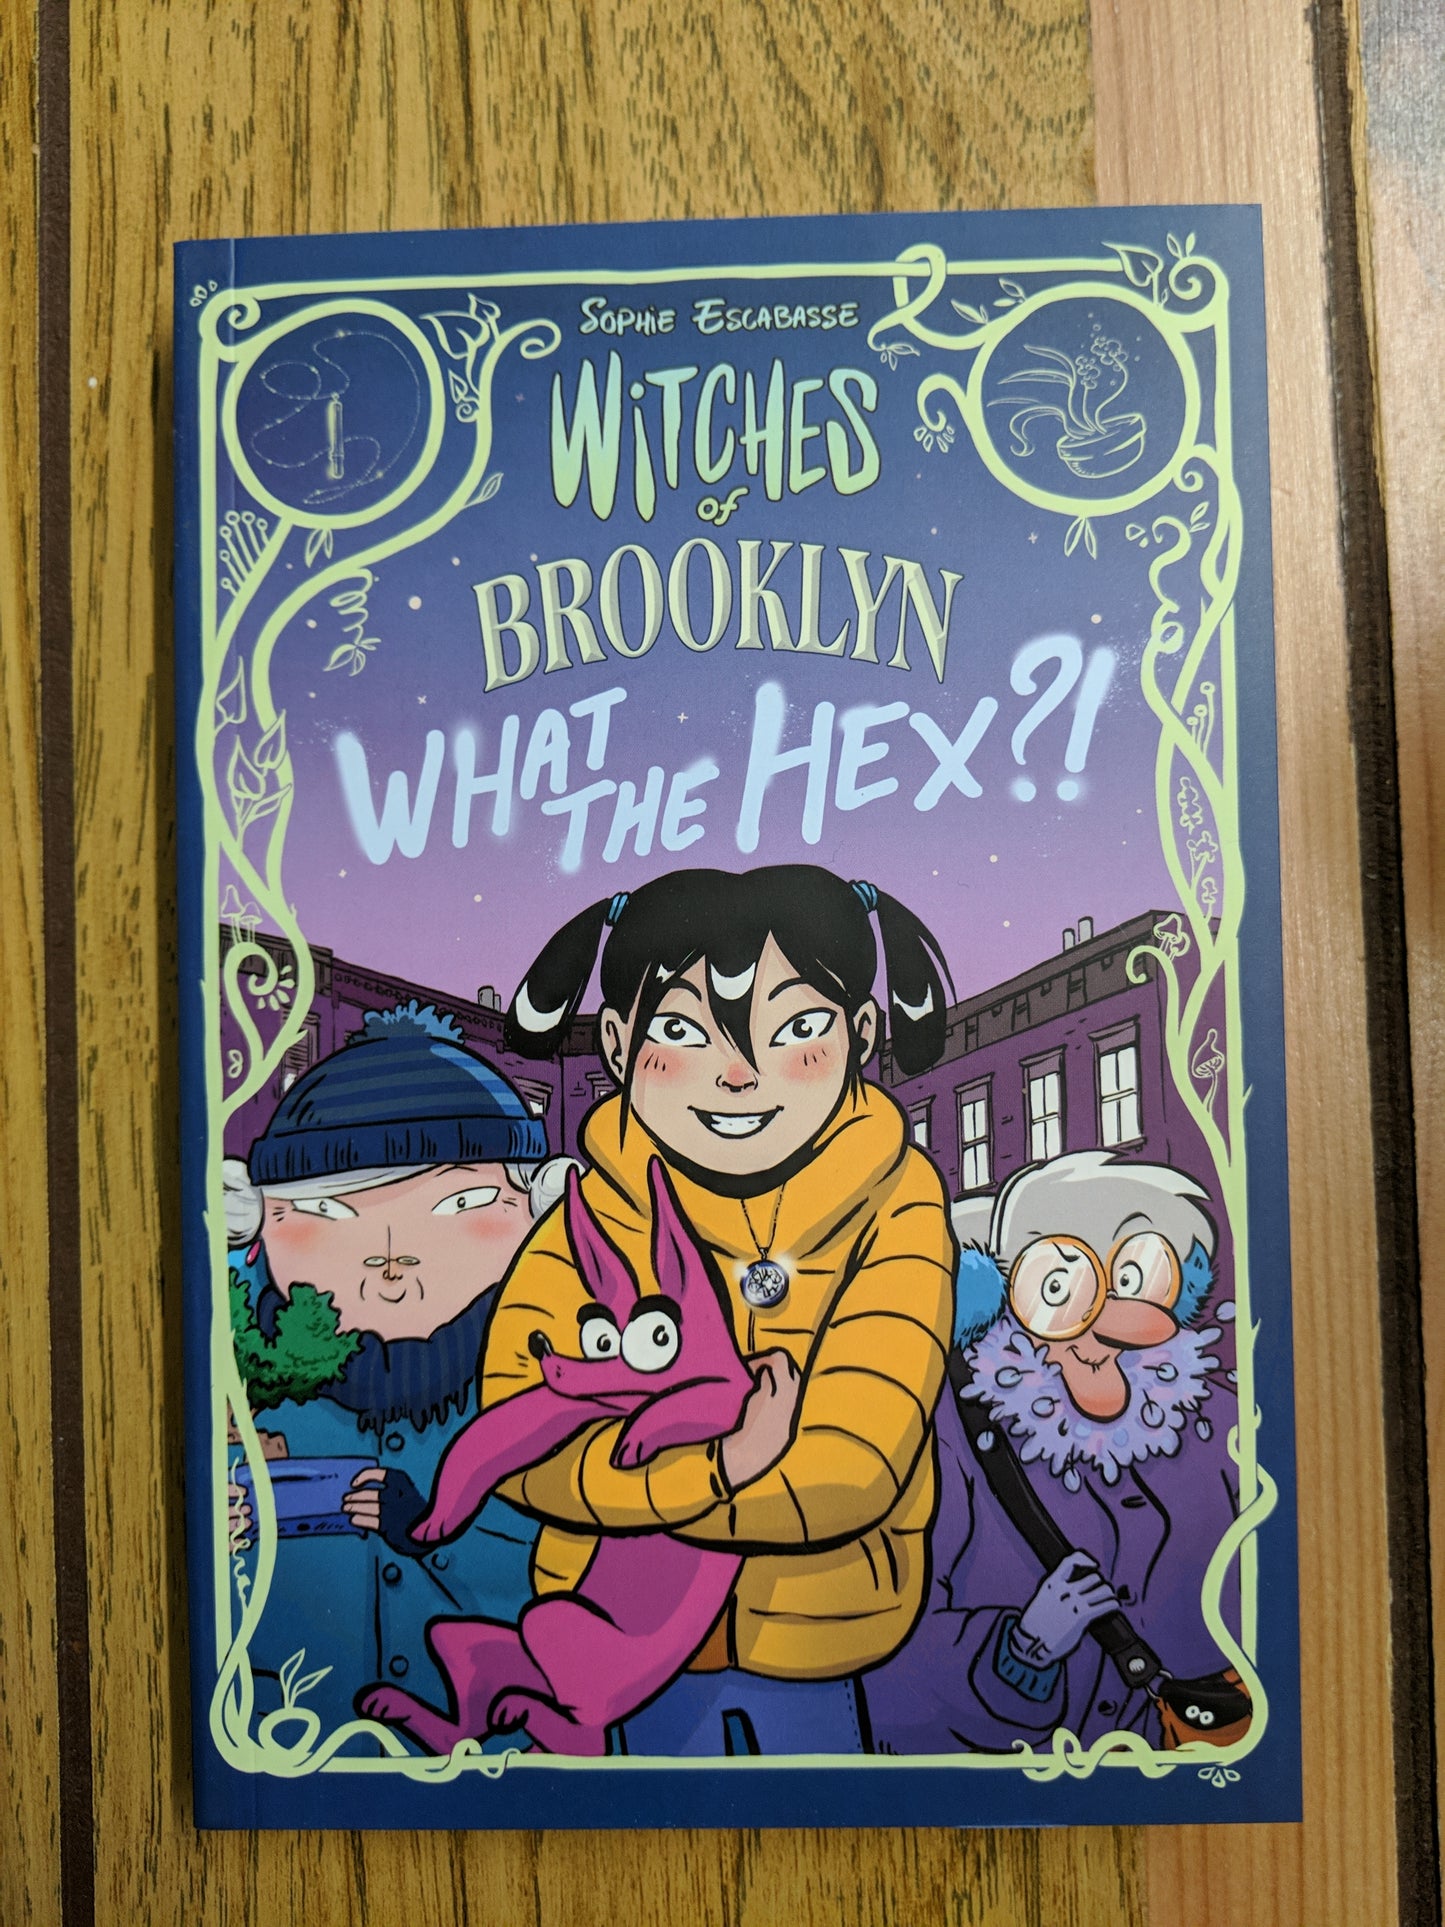 Witches of Brooklyn: What the Hex? (#2)